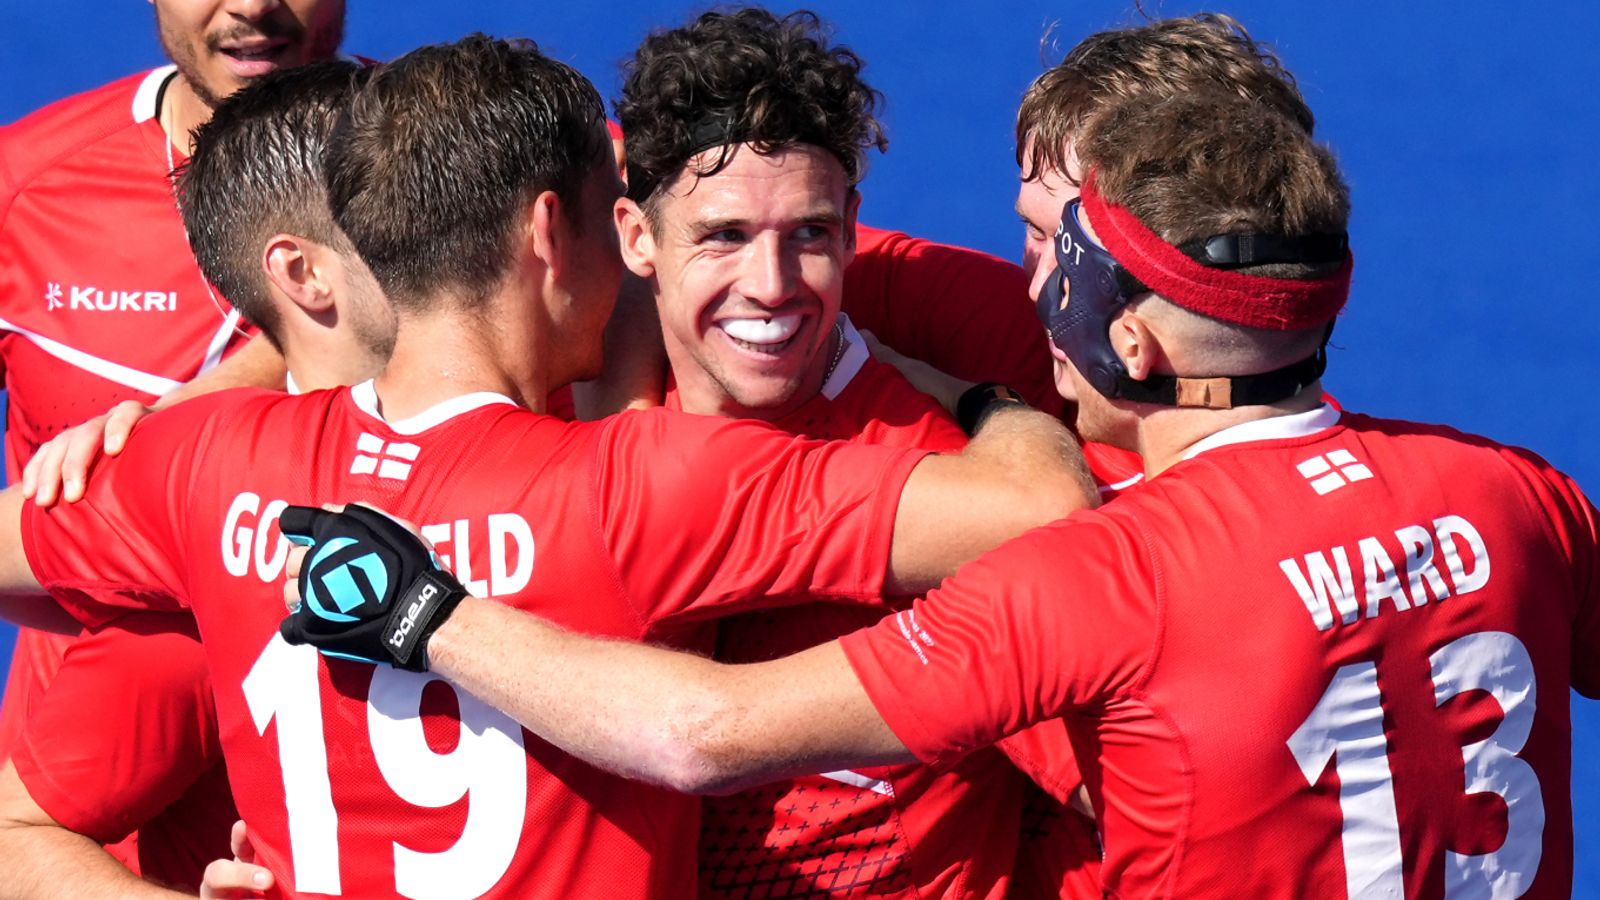 commonwealth-games-live-england-chasing-medals-in-hockey-badminton-diving-and-more-on-final-day